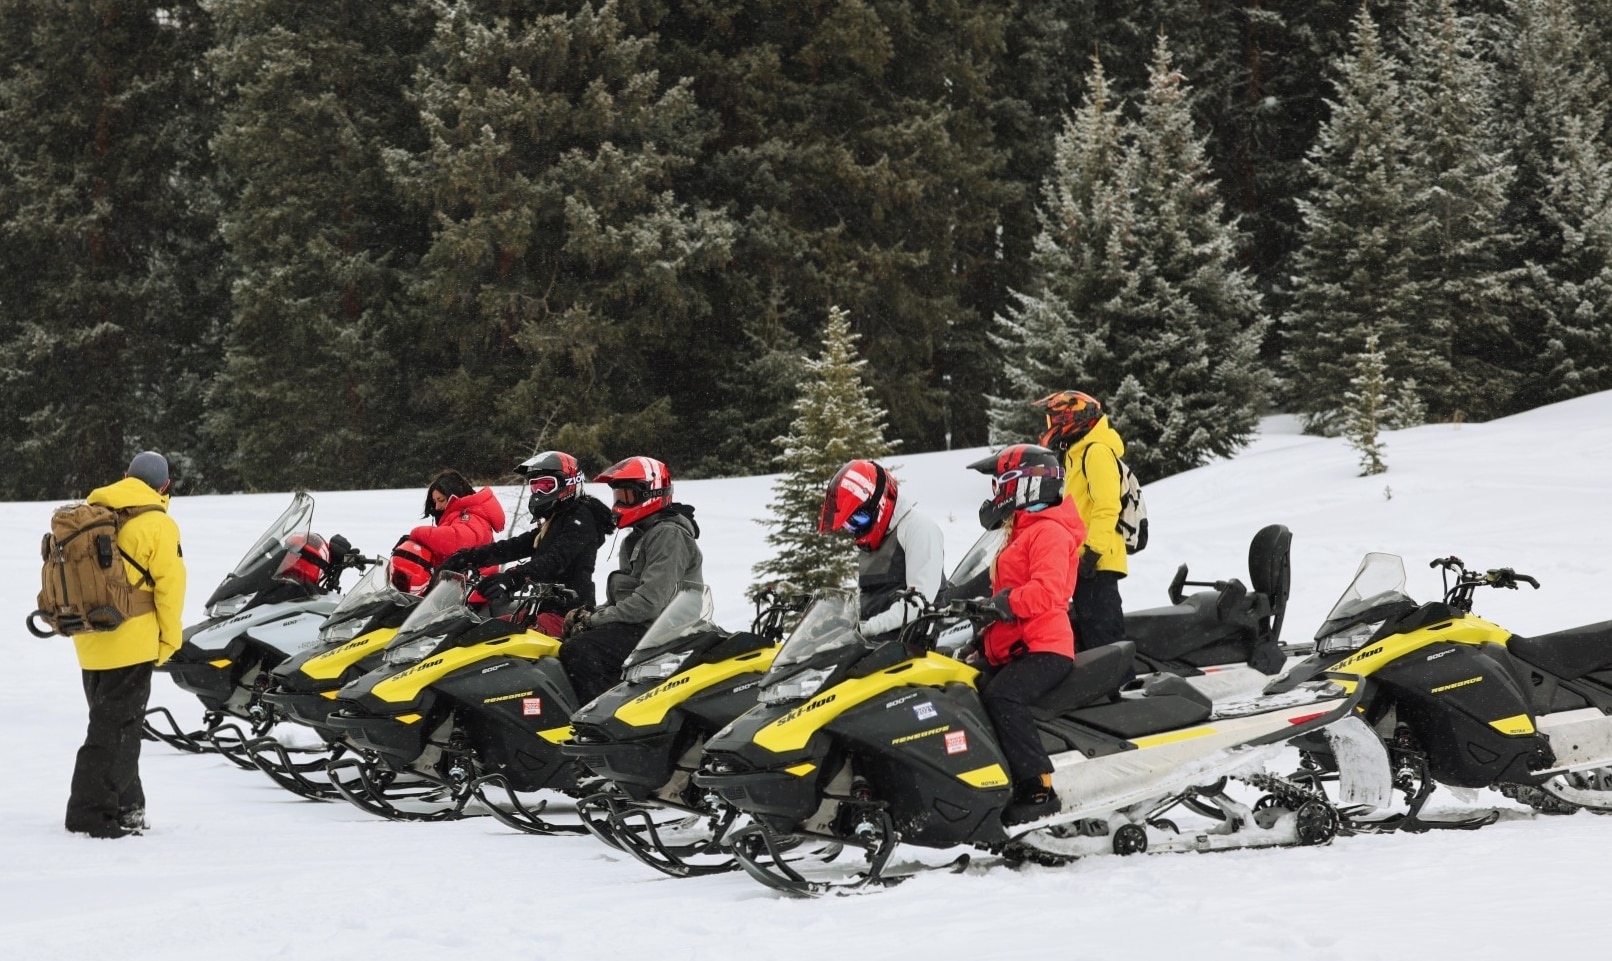 How to choose your next snowmobiling adventure?